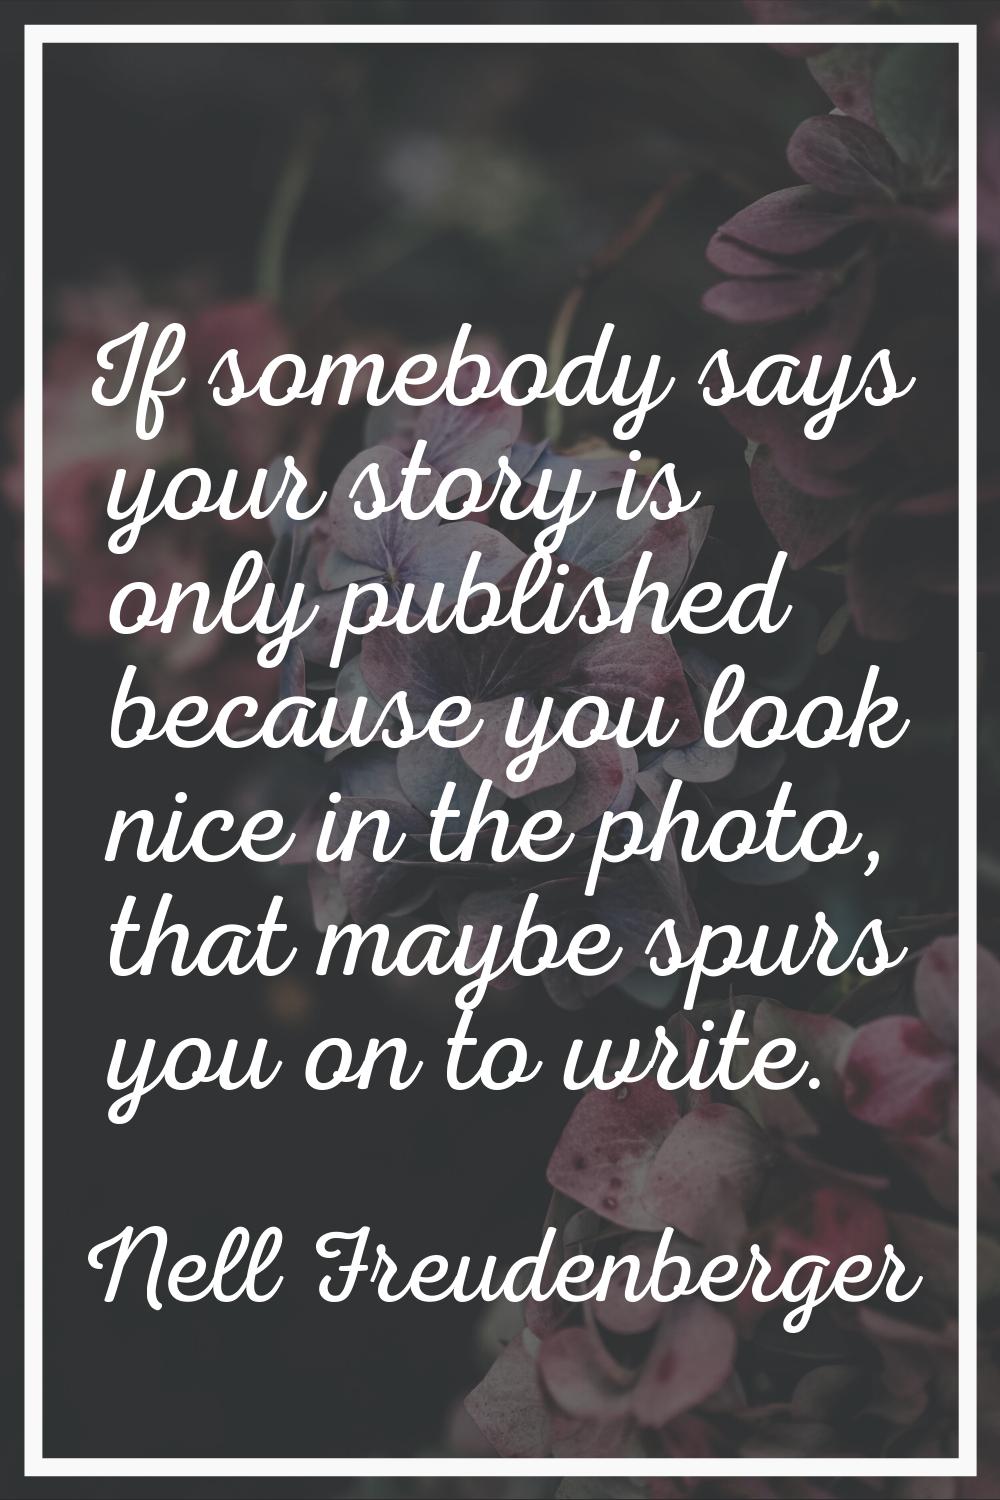 If somebody says your story is only published because you look nice in the photo, that maybe spurs 